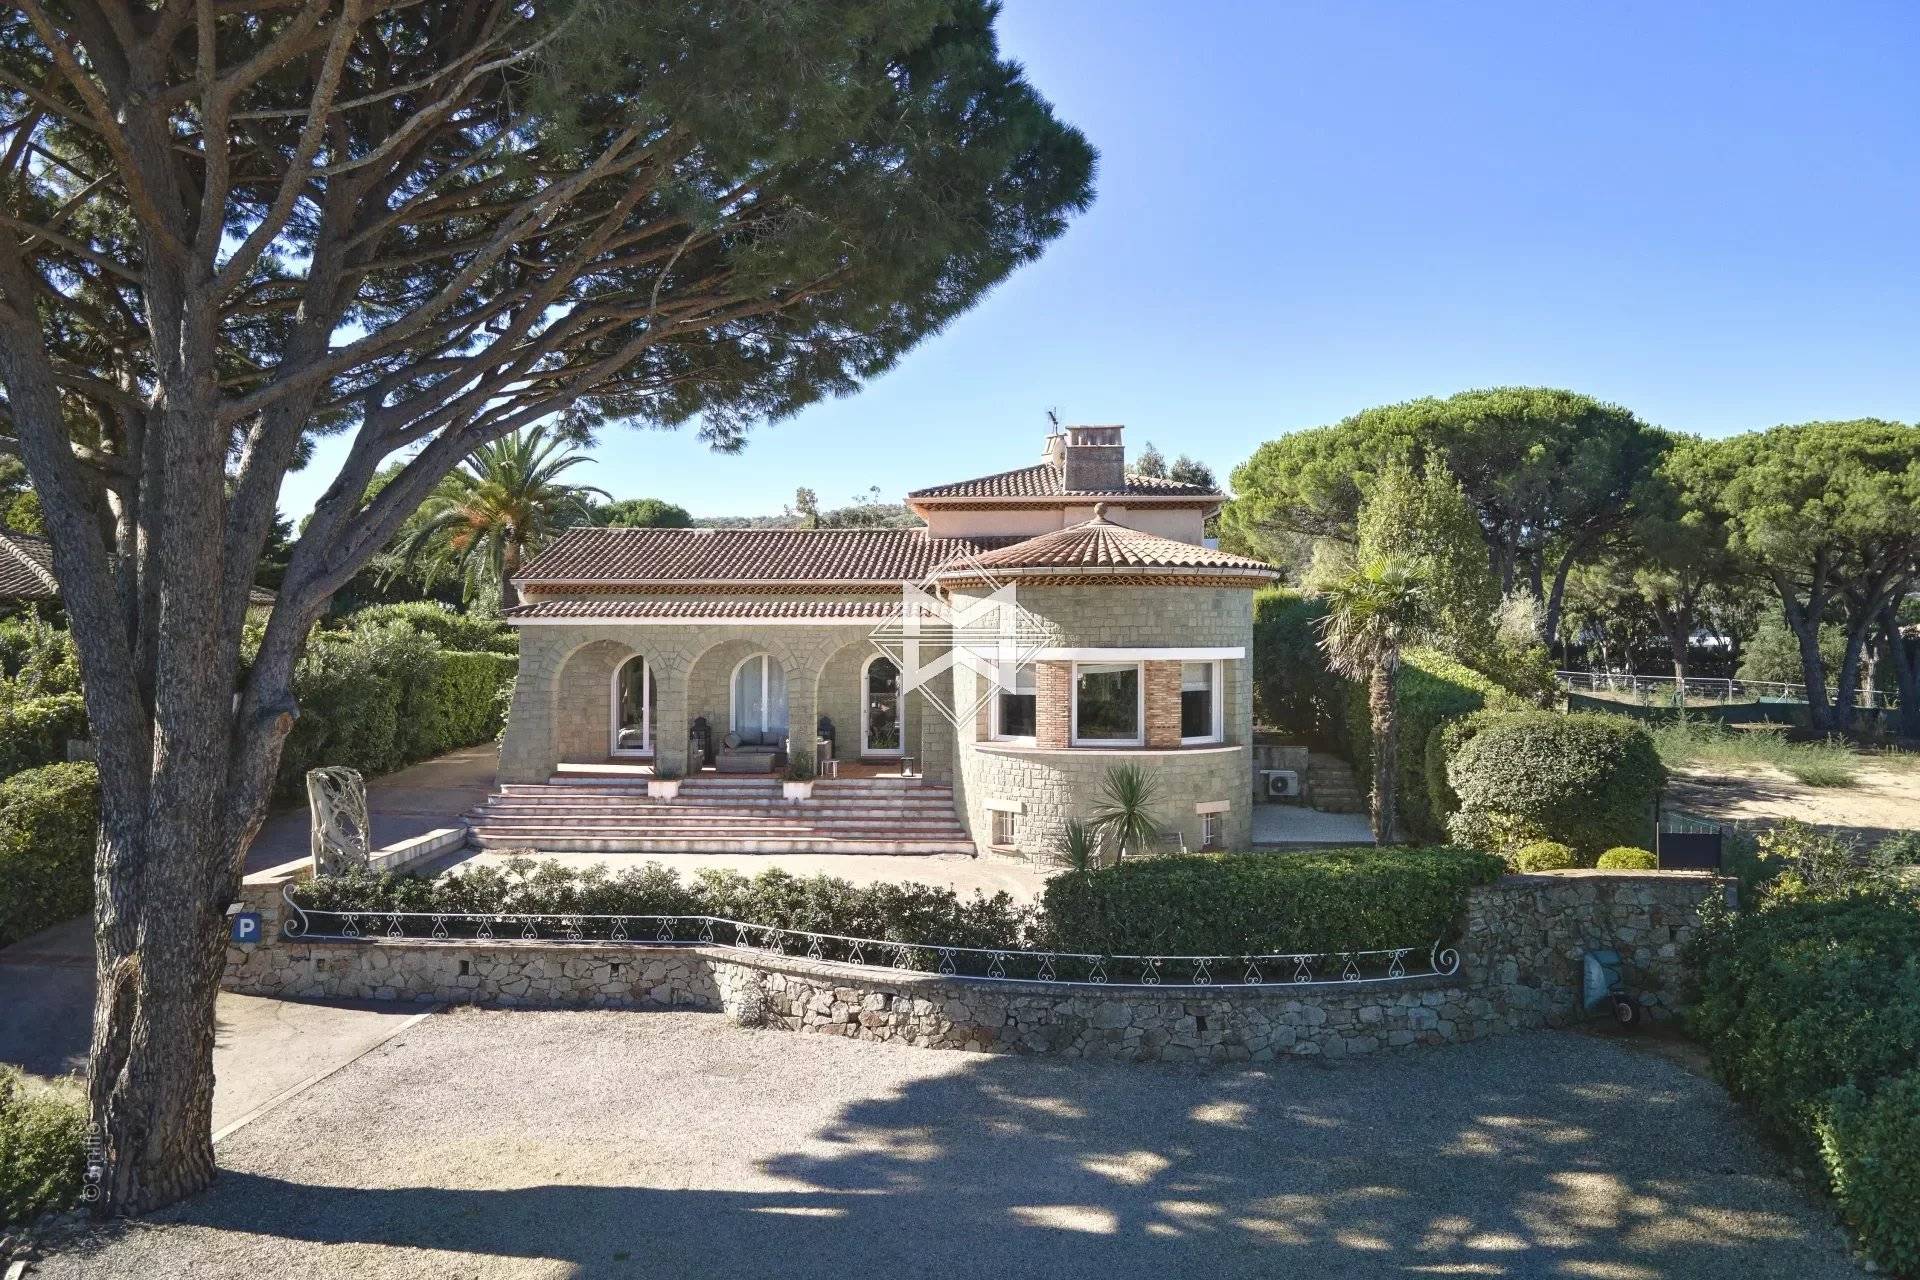 Few steps from the village of Saint Tropez - Closed domain